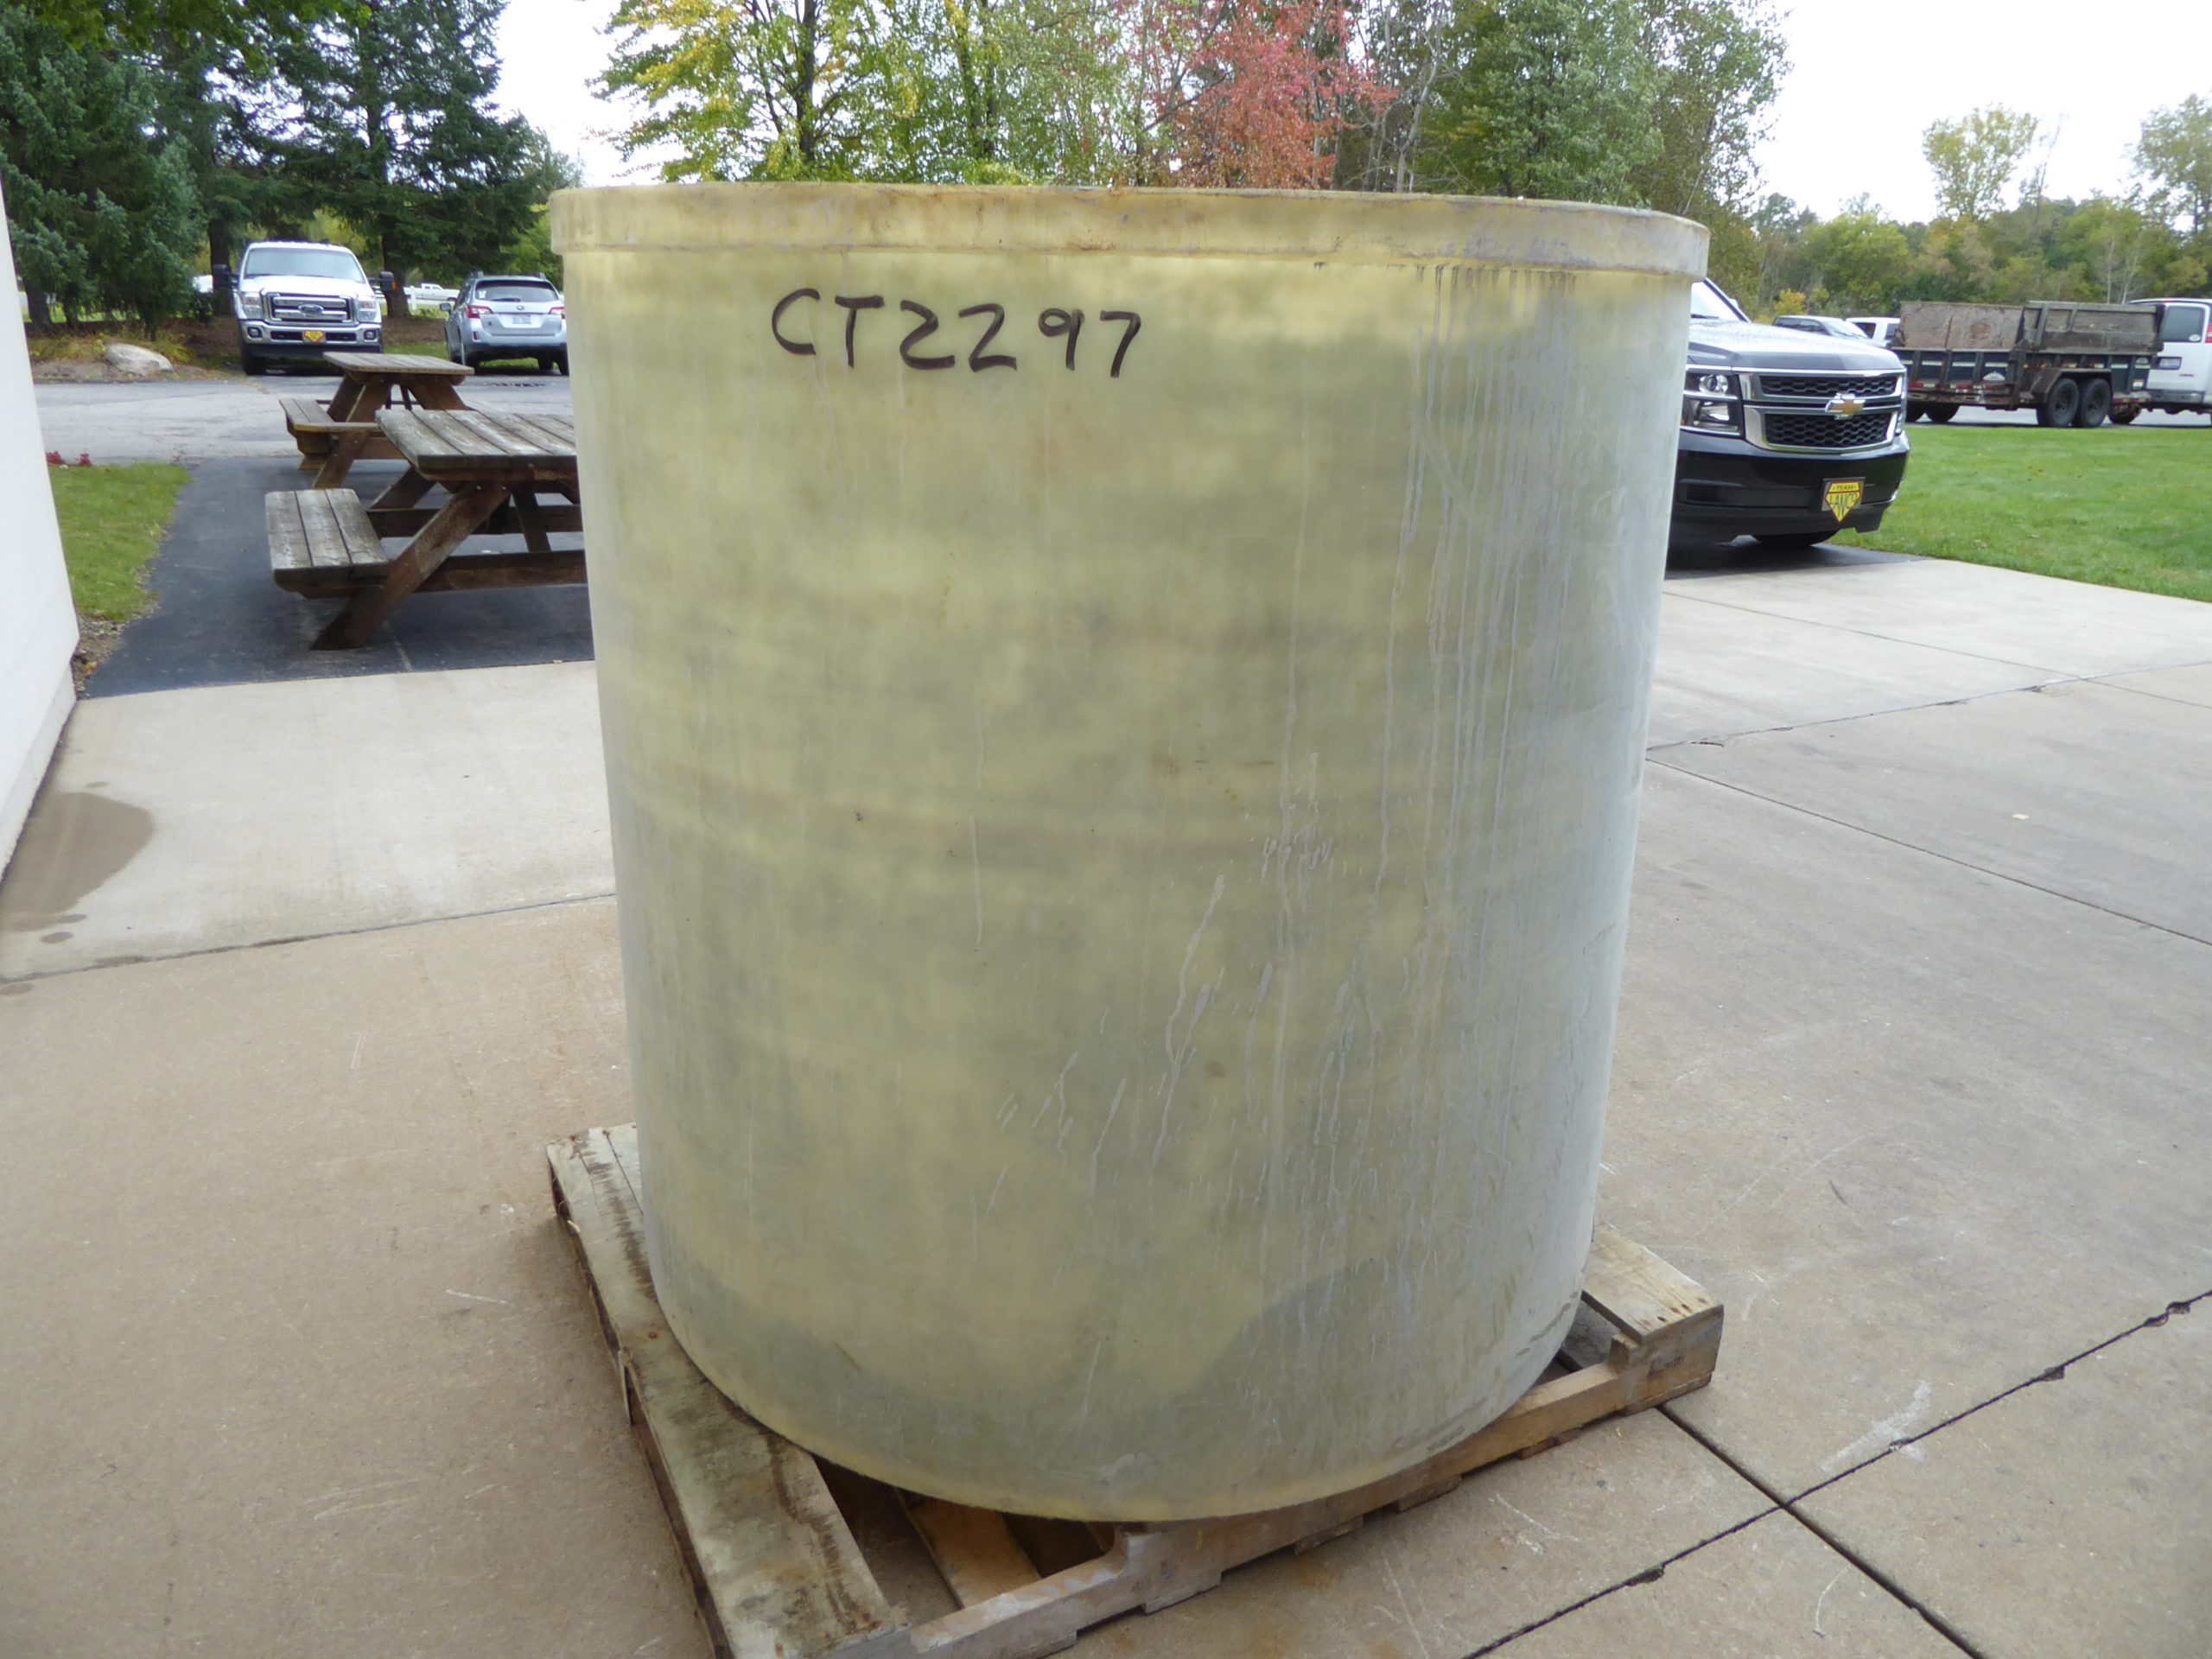 Used Cylindrical Tank - 350 Gallon Poly Round Tank CT2297-Tanks-Cylindrical